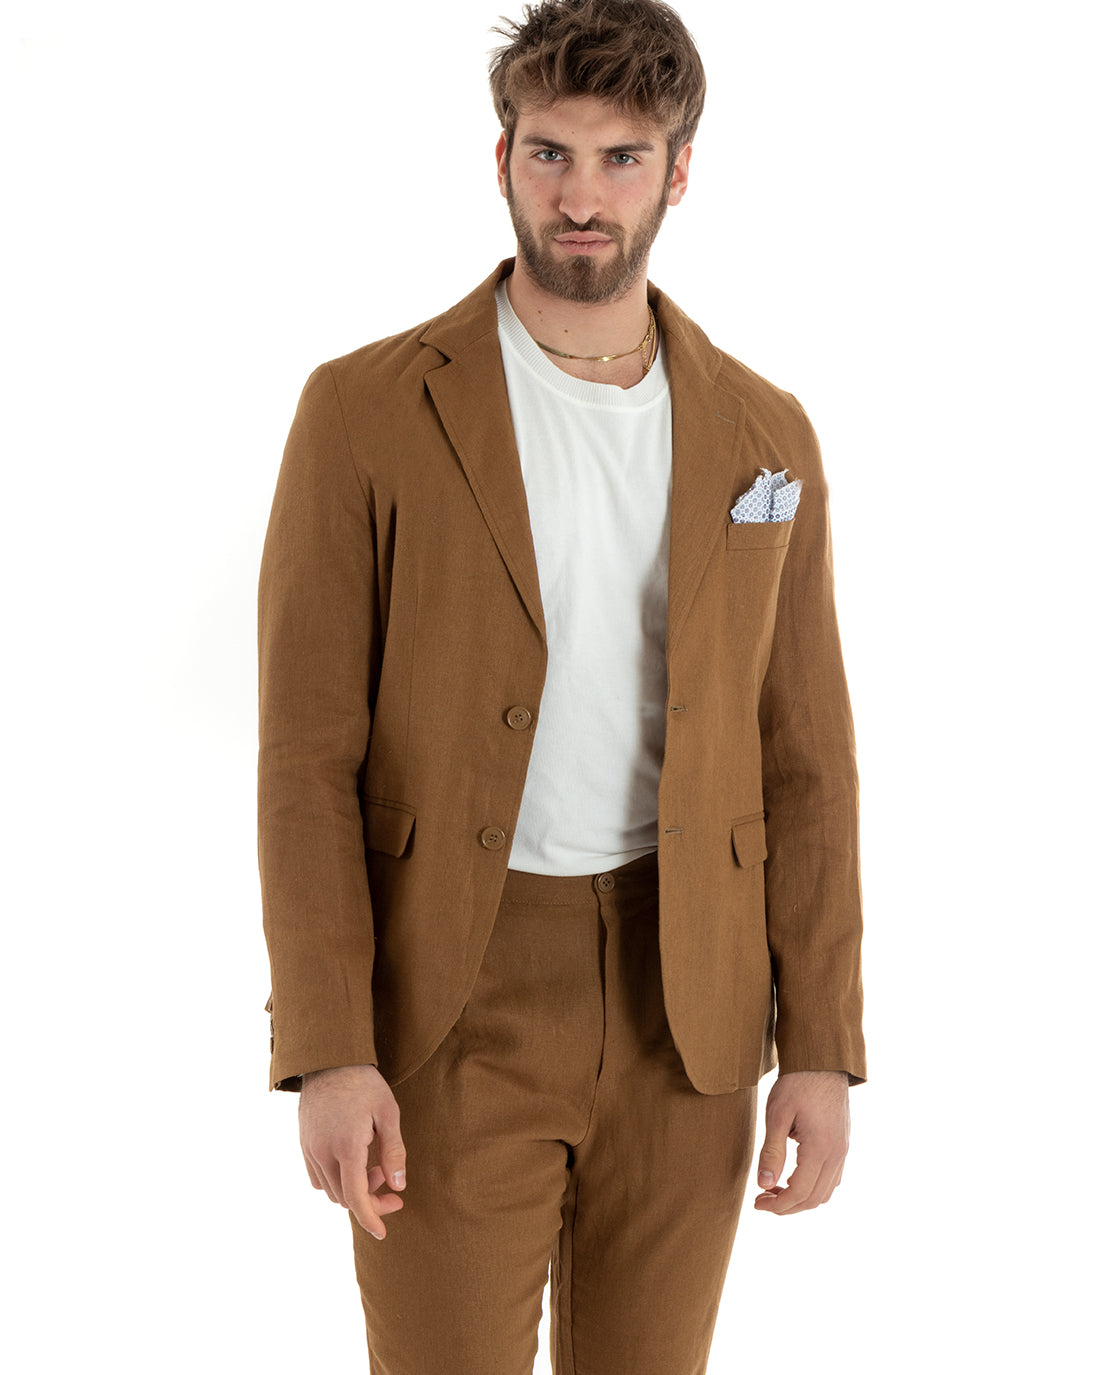 Men's Single-Breasted Linen Jacket Solid Color Camel Tailored Ceremony Elegant Casual GIOSAL-G3058A